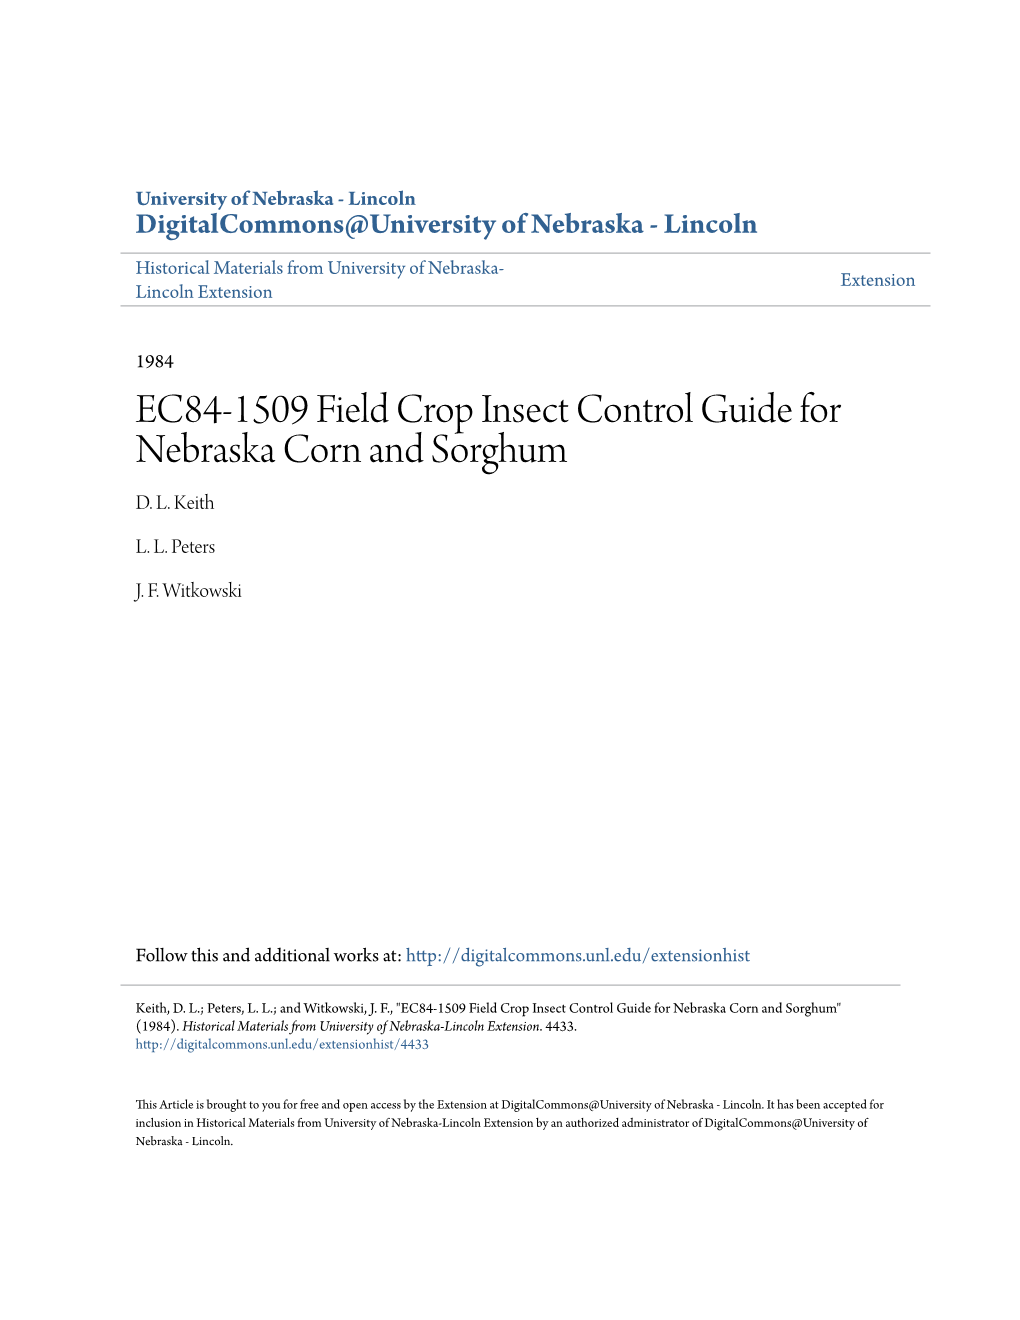 EC84-1509 Field Crop Insect Control Guide for Nebraska Corn and Sorghum D